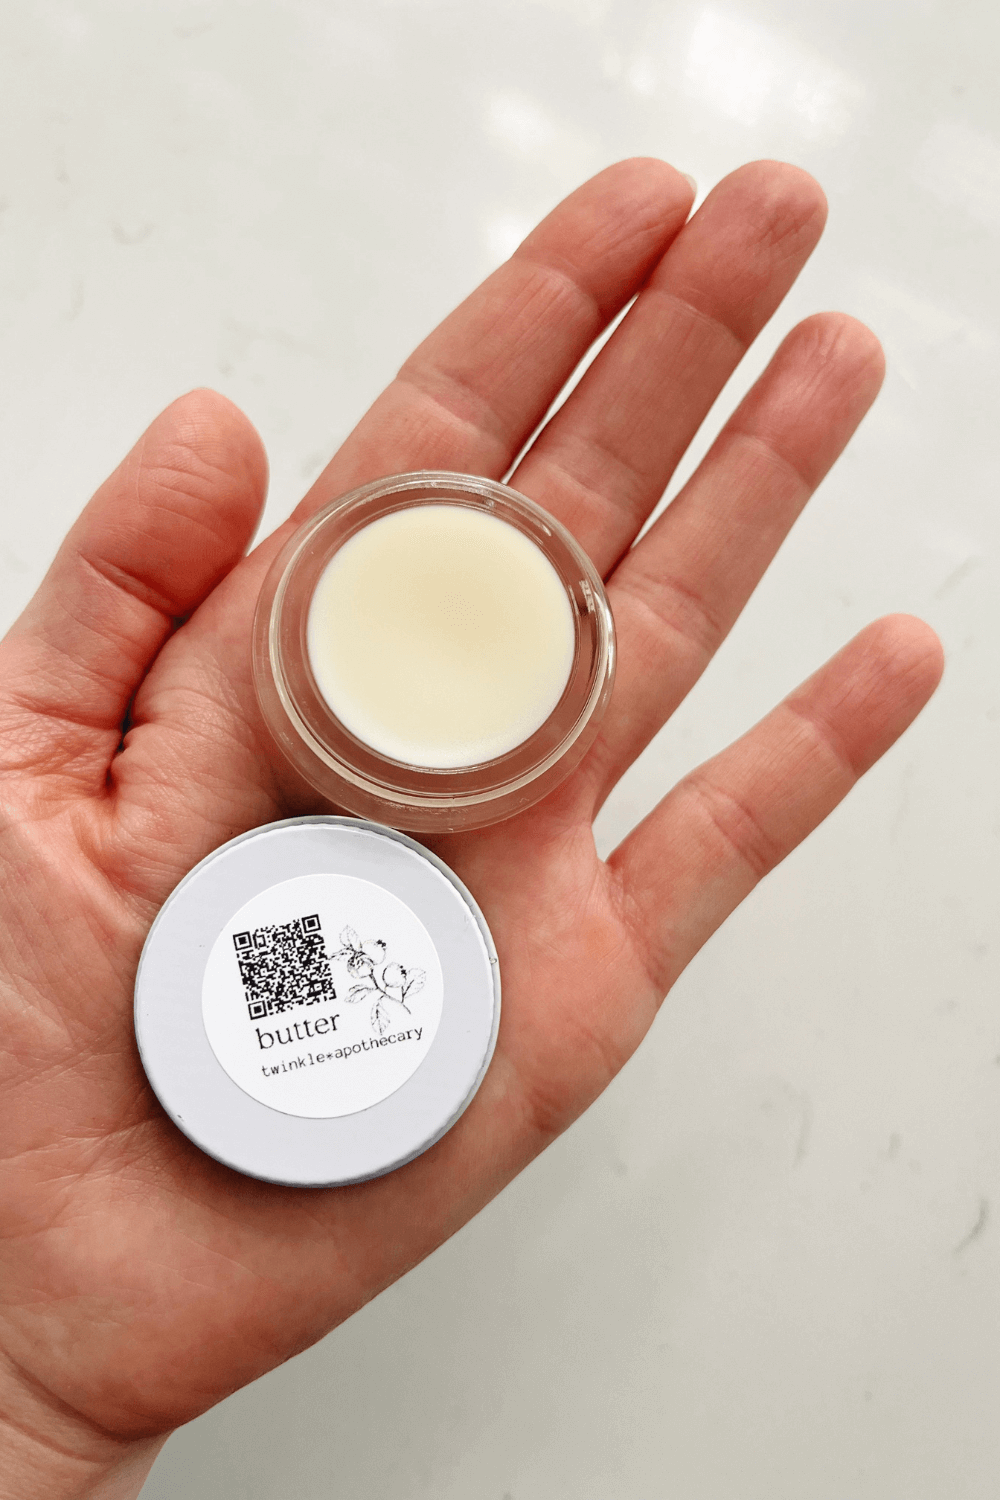 sample jar of twinkle apothecary butter moisturizer for face and body 